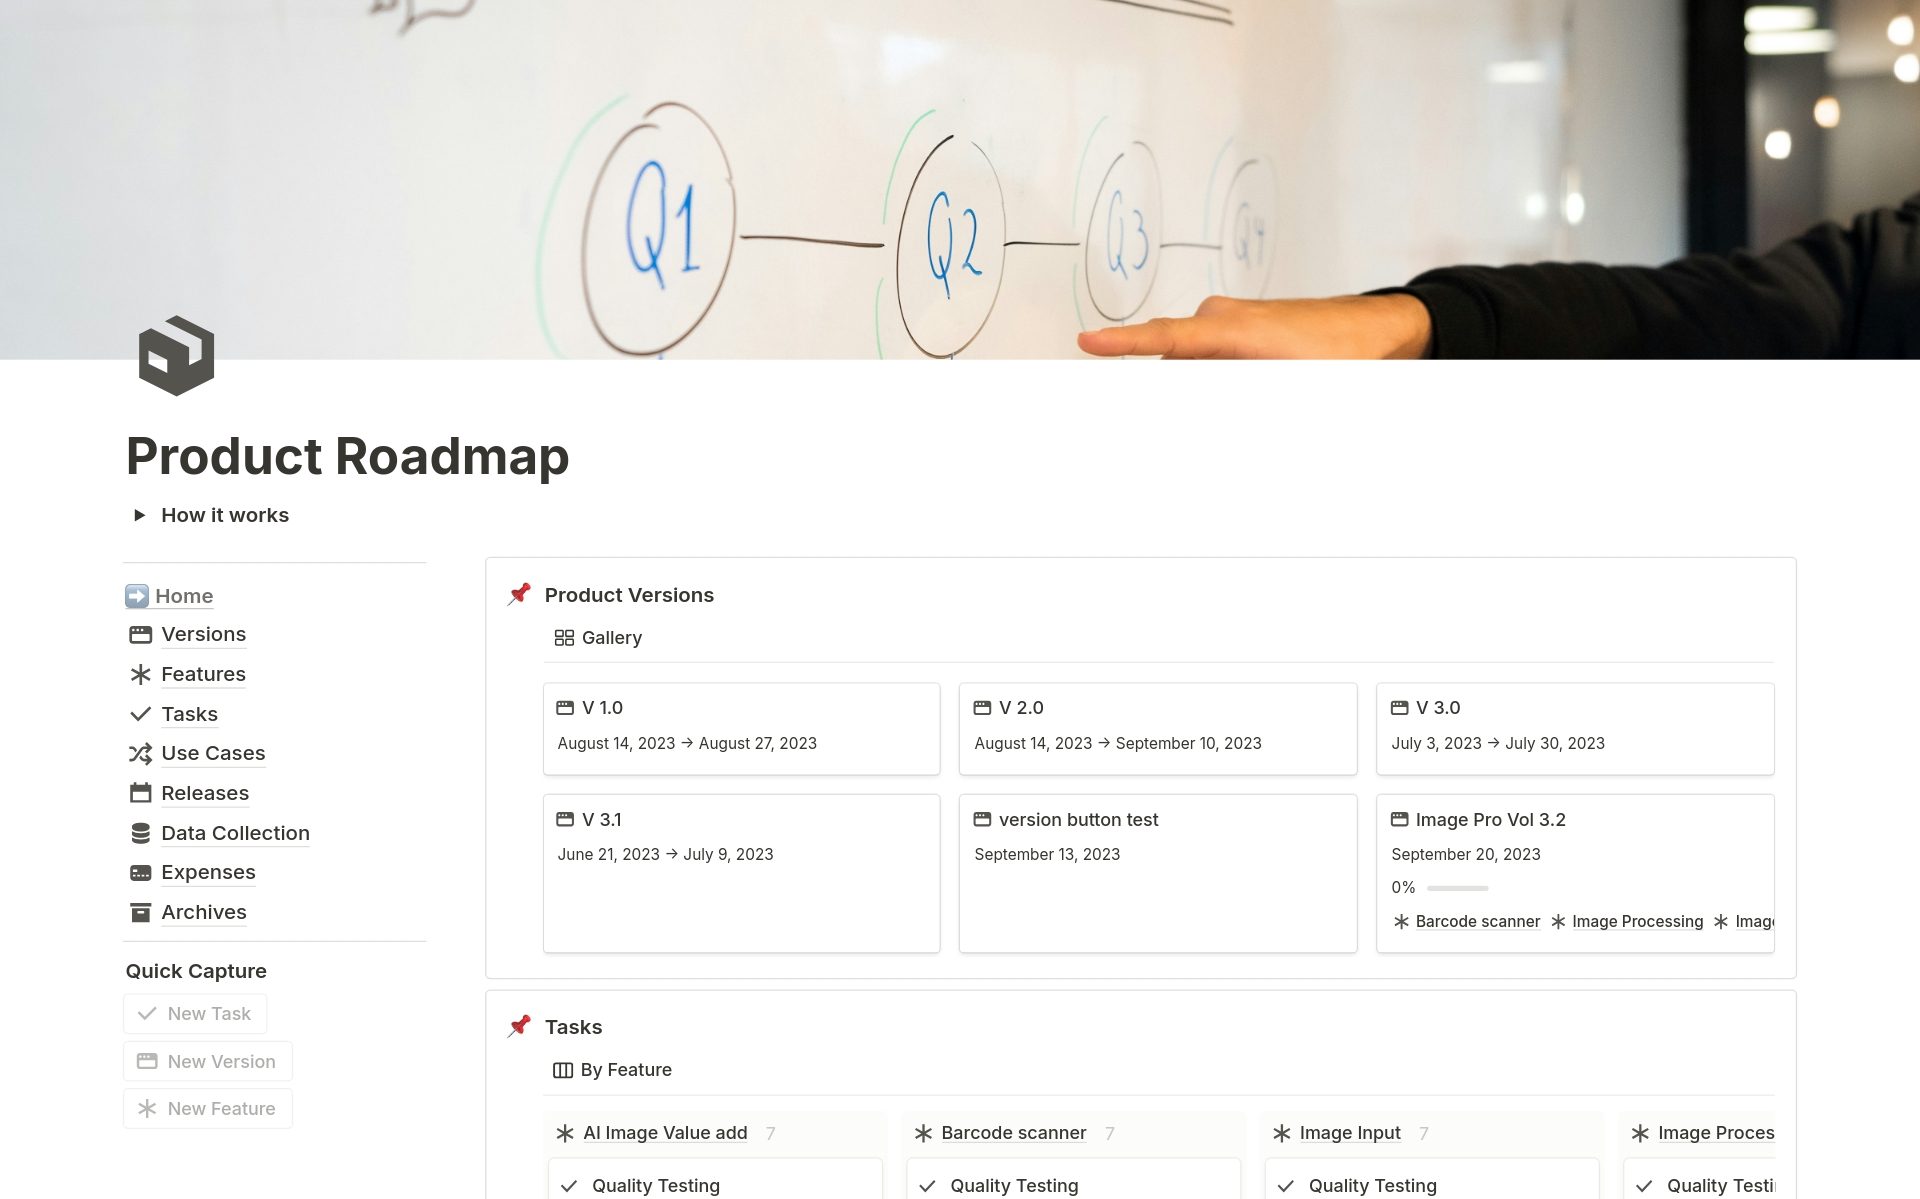 Your Path to Seamless Product Development Begins Now! Harness the Potential of the Product Roadmap Notion Template to Achieve Effortless Roadmapping, Masterful Planning, and Attain Unrivaled Triumph.